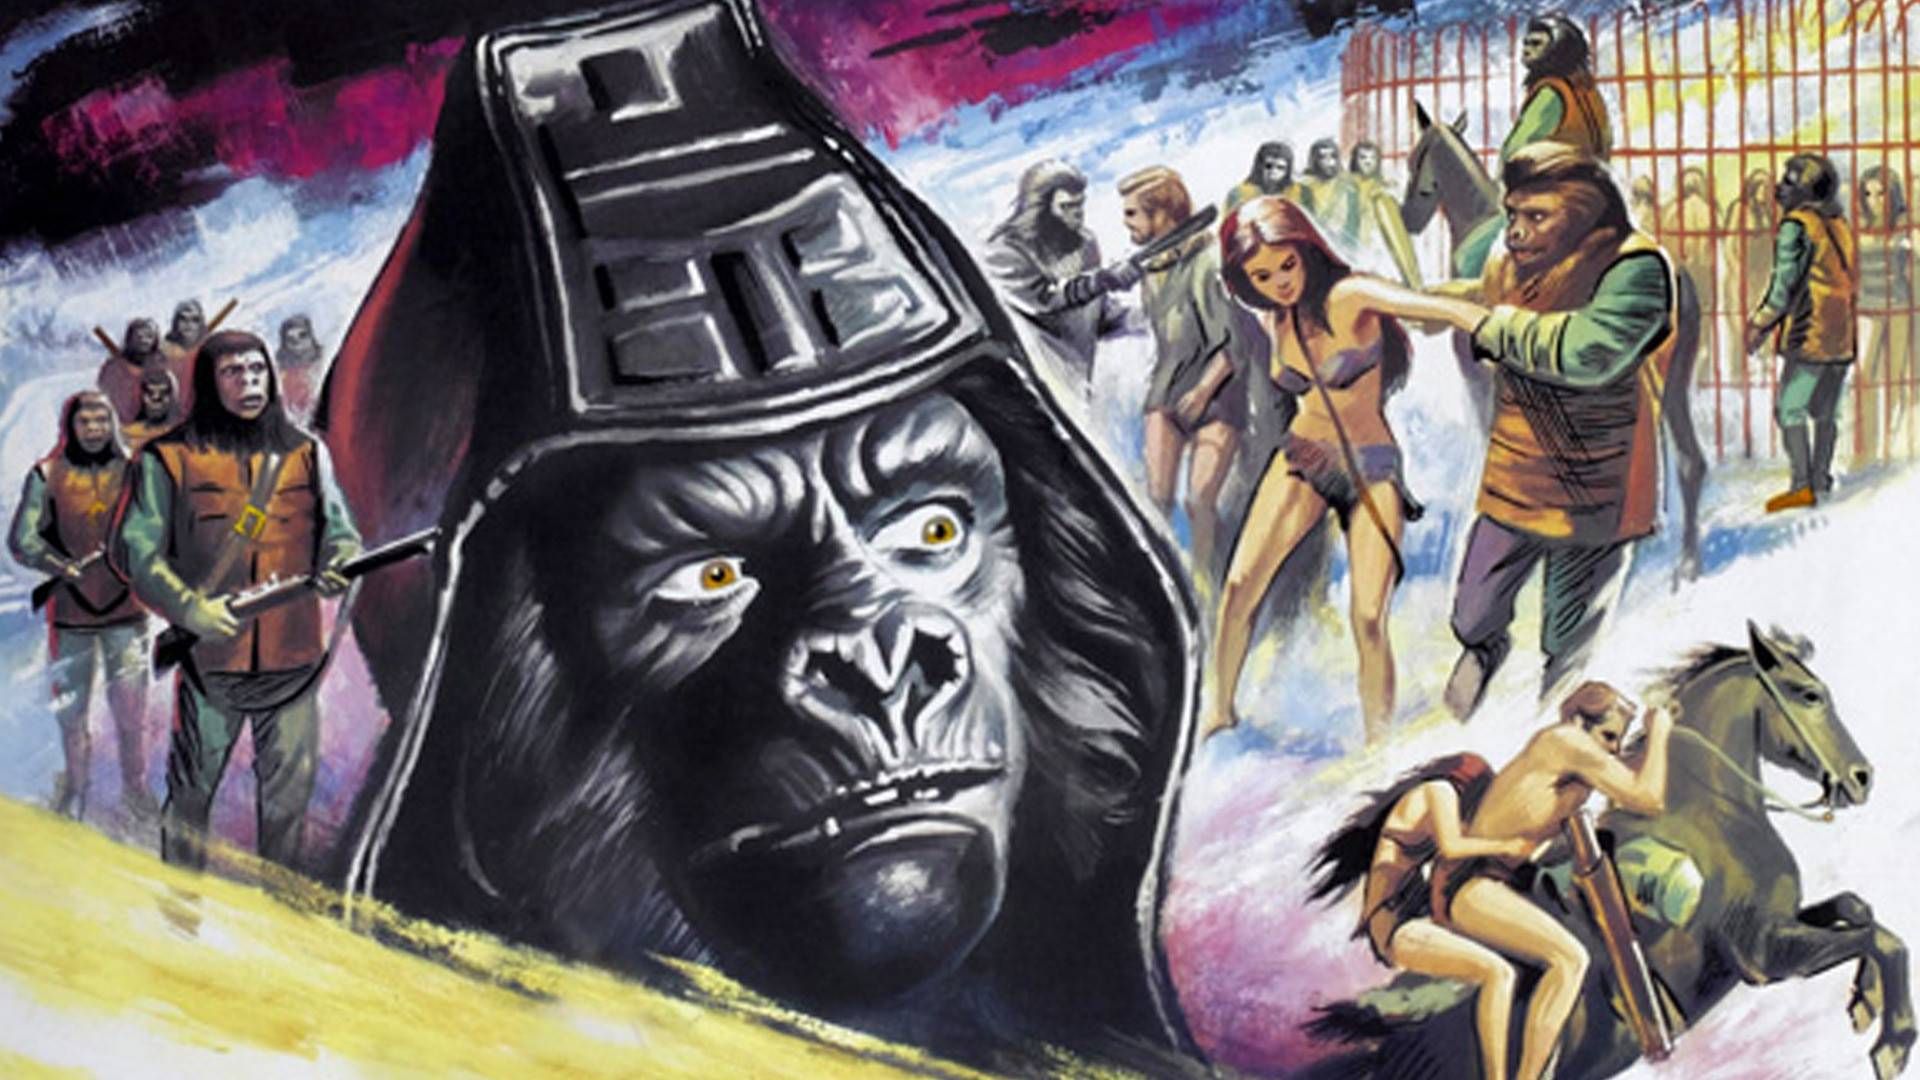 1970 Beneath Planet Of The Apes Movie Artwork - HD Wallpaper 